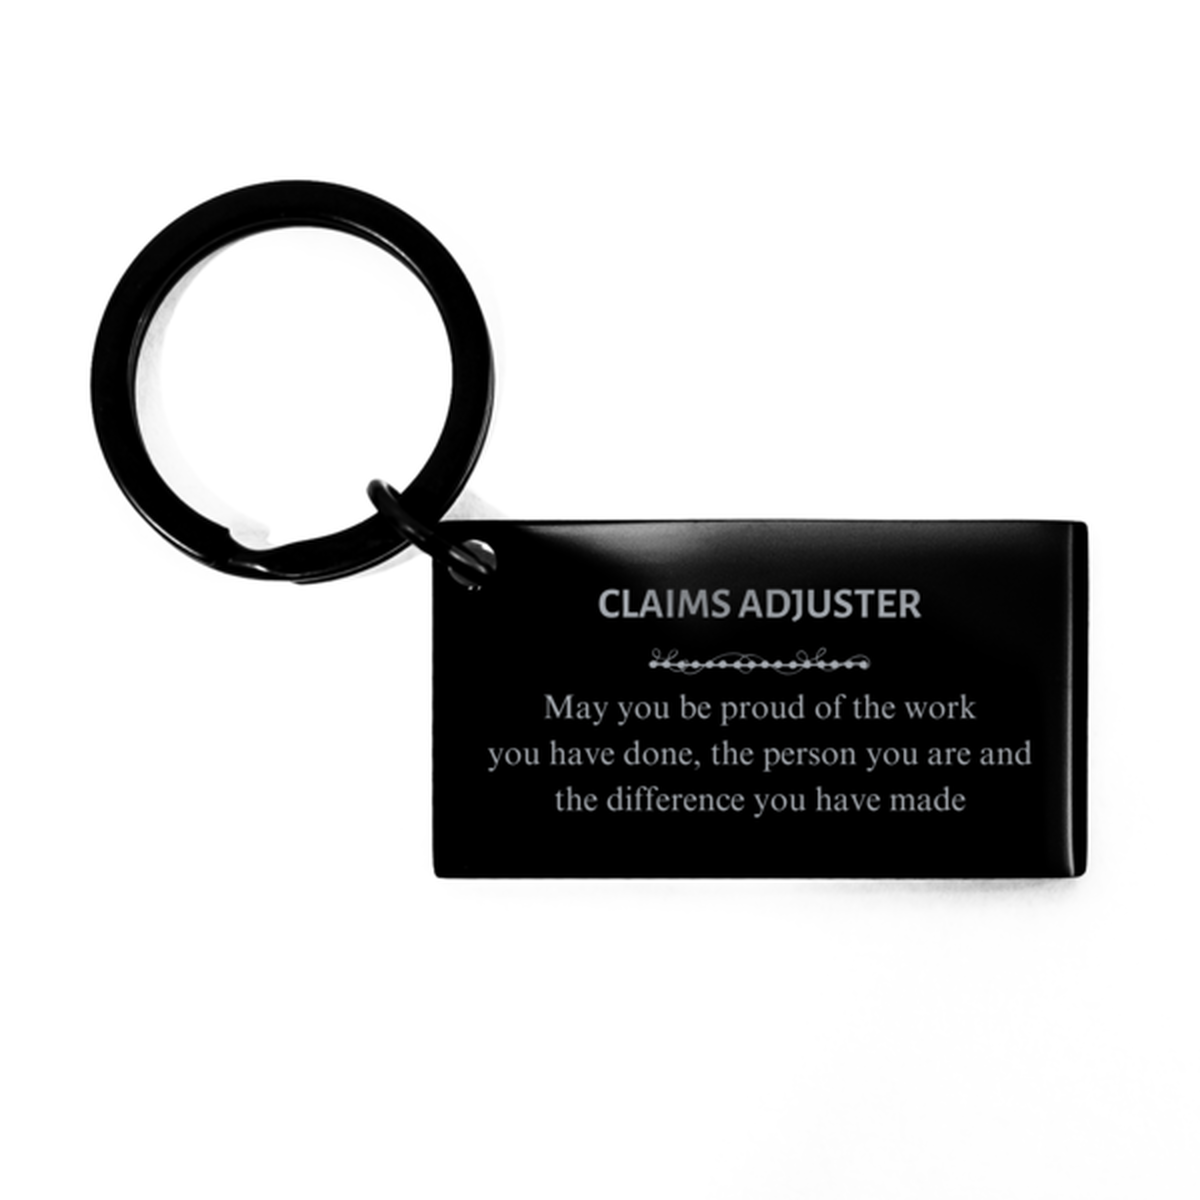 Drafter May you be proud of the work you have done, Retirement Claims Adjuster Keychain for Colleague Appreciation Gifts Amazing for Claims Adjuster